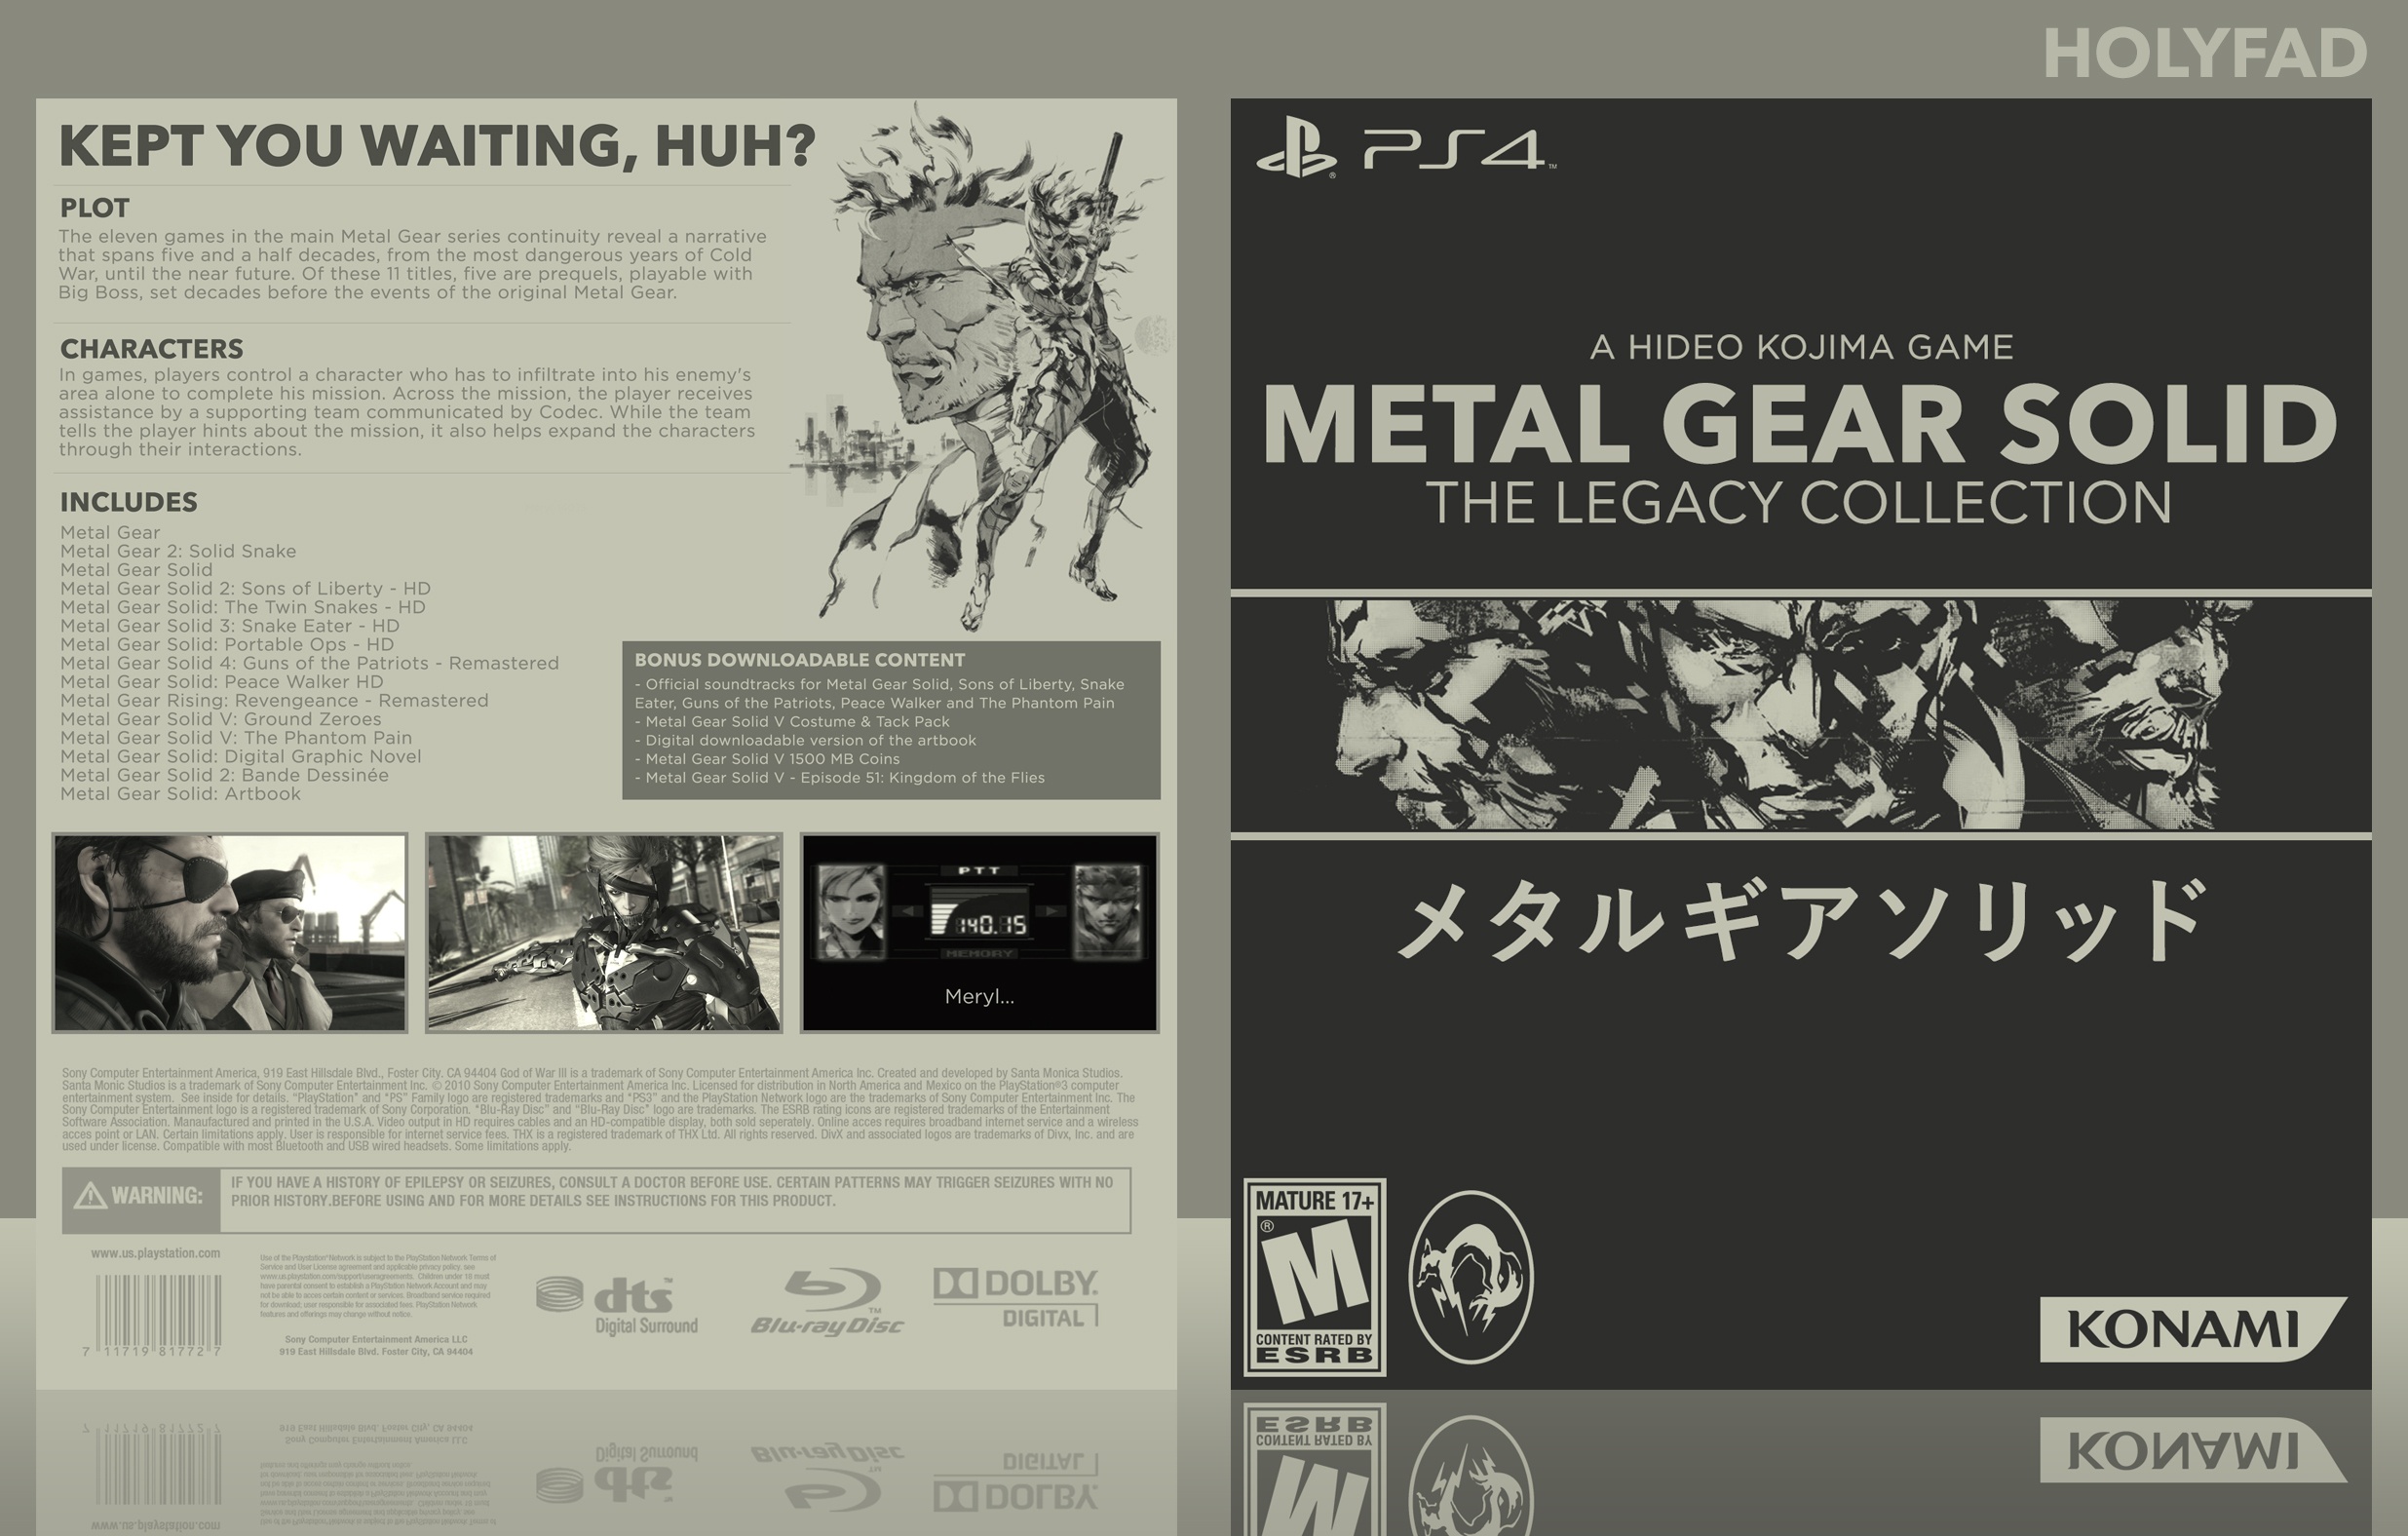 Metal Gear Solid: The Legacy Collection box cover